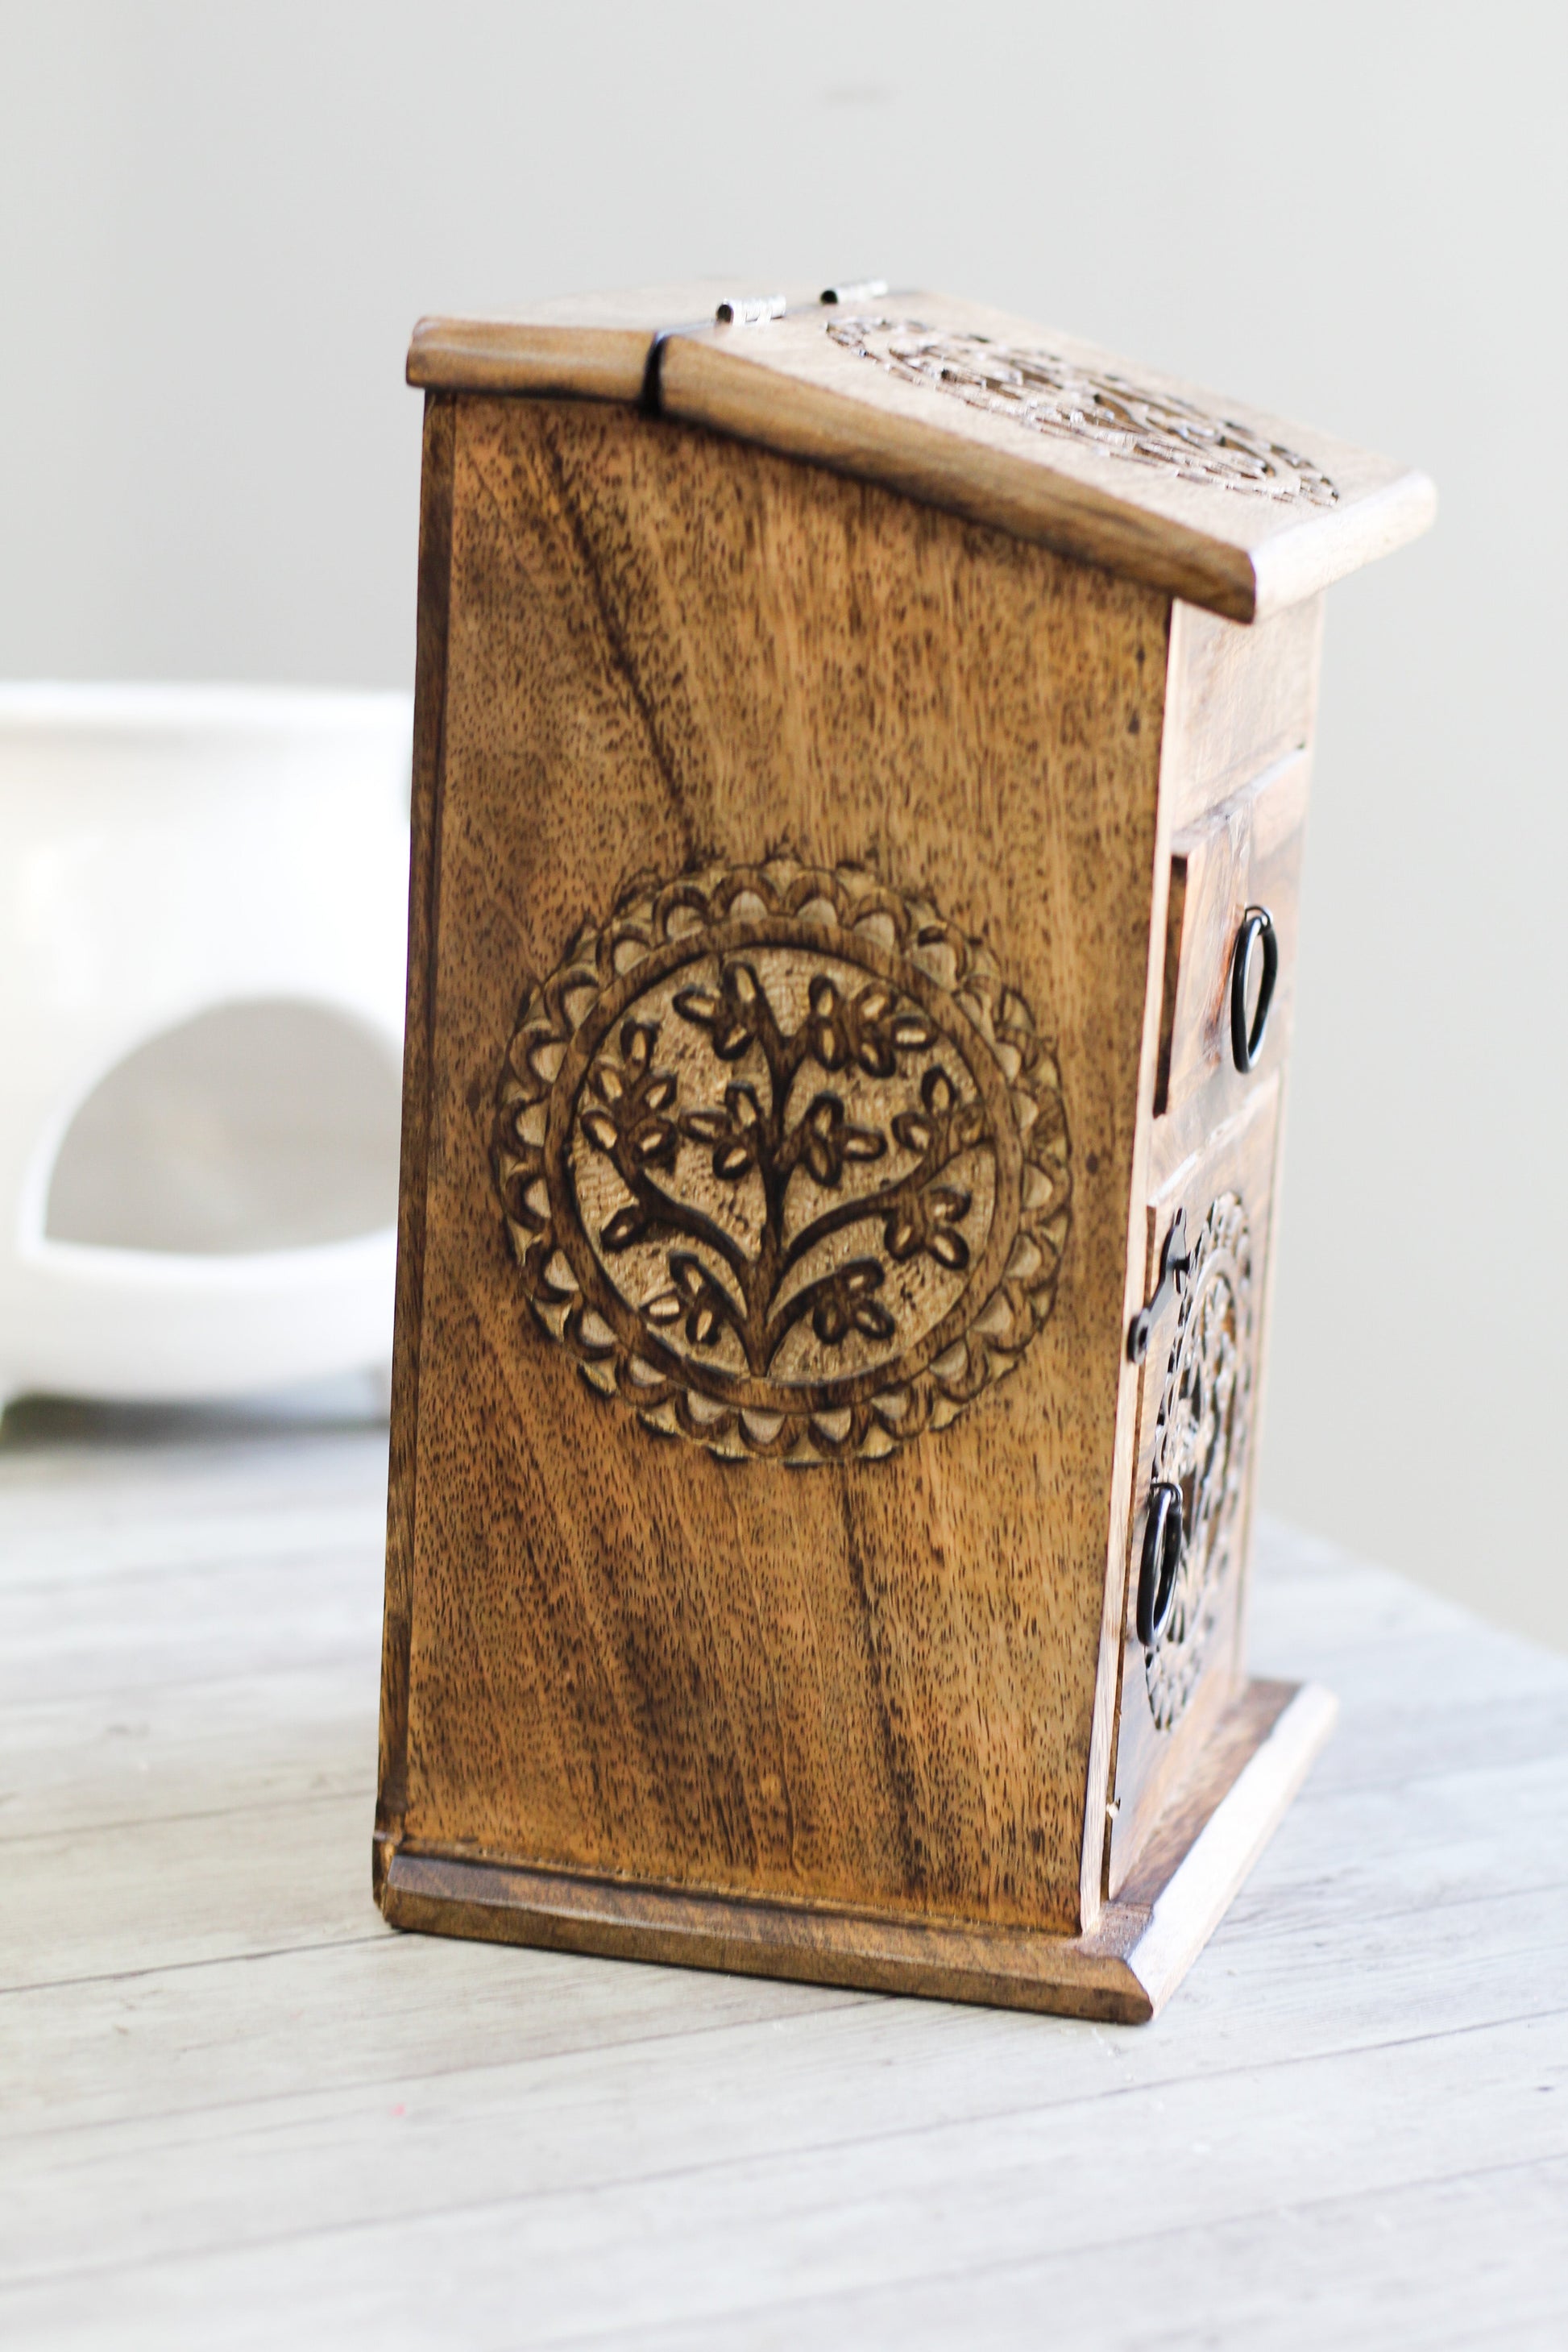 Hand Crafted Herb Chest Altar Box Wiccan Altarware |